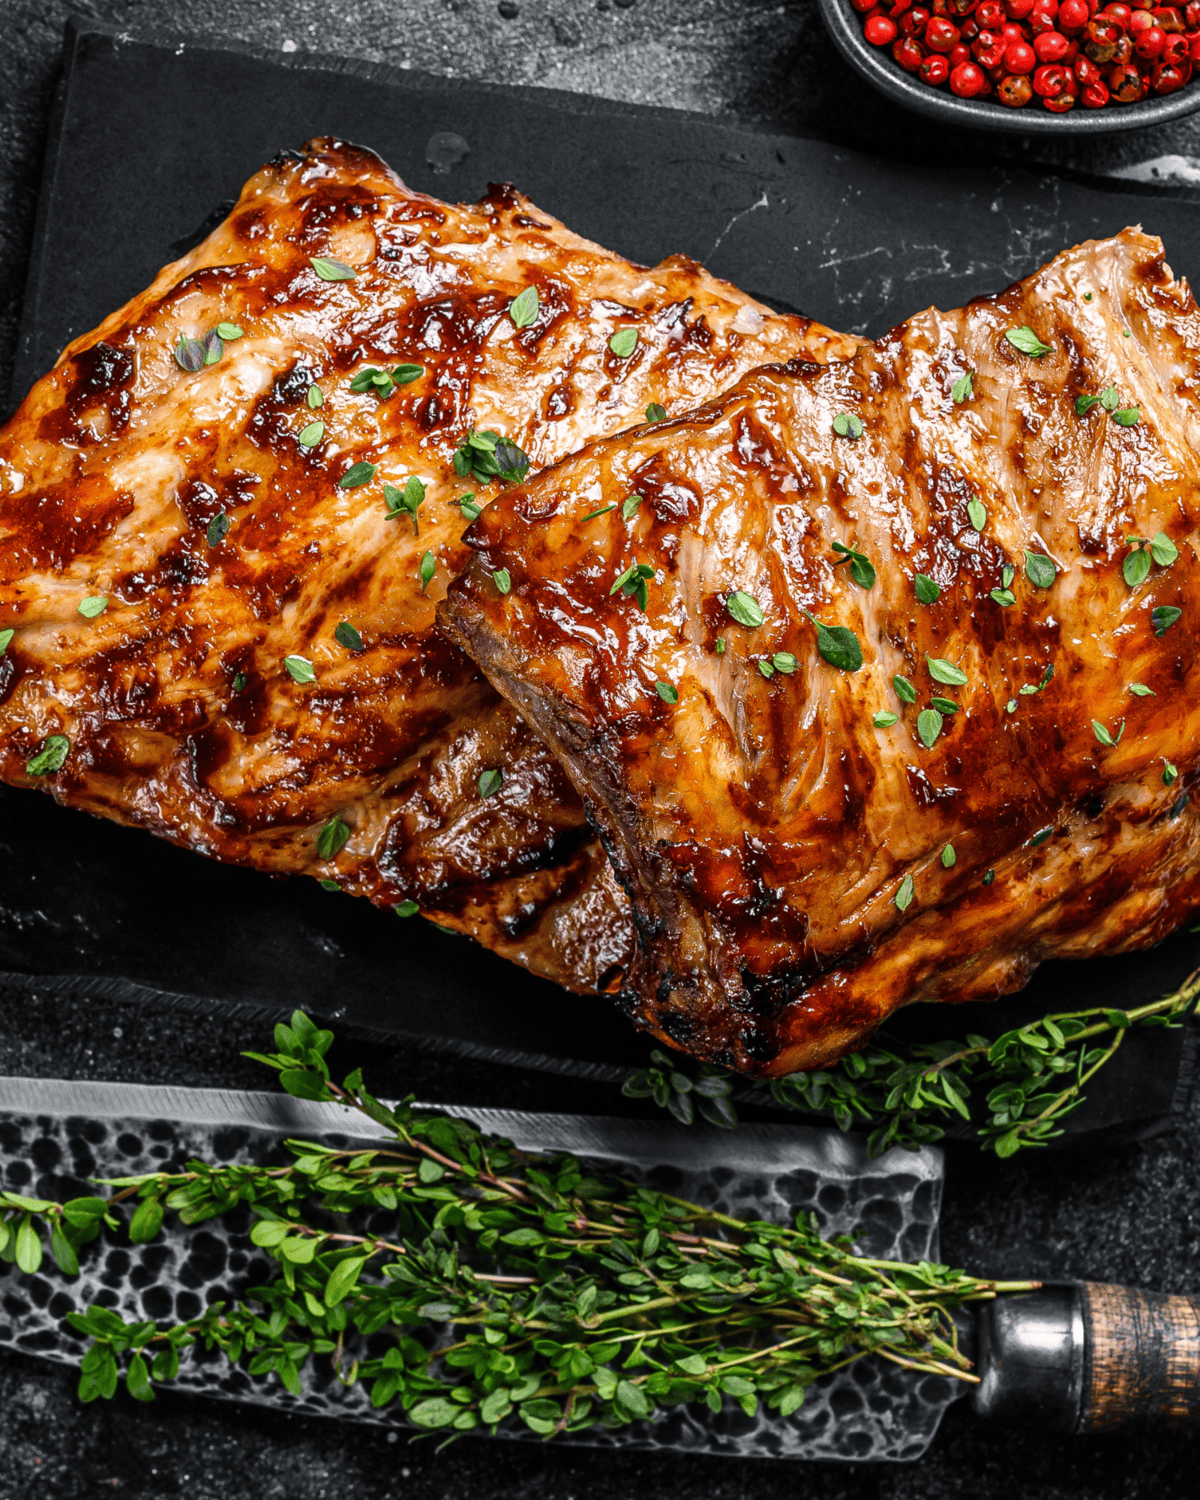 halved rack of baked pork ribs that were later grilled on the griddle and served with fresh herbs.